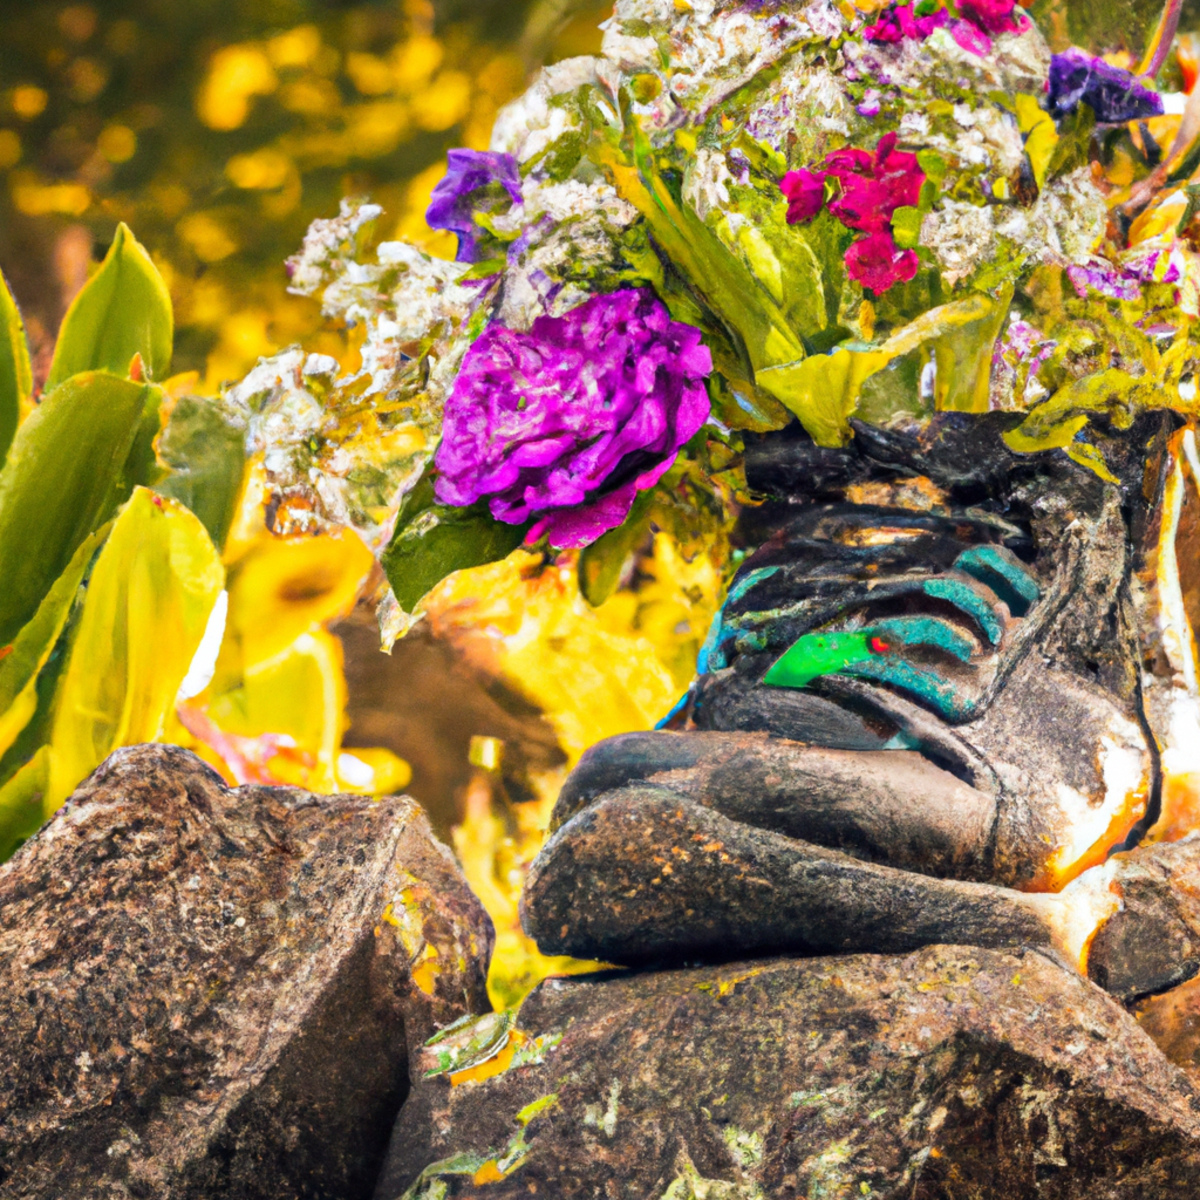 Resilient individuals with Gaucher Disease triumph through blooming flowers, hiking boots, and a gleaming trophy. Embrace inner strength.